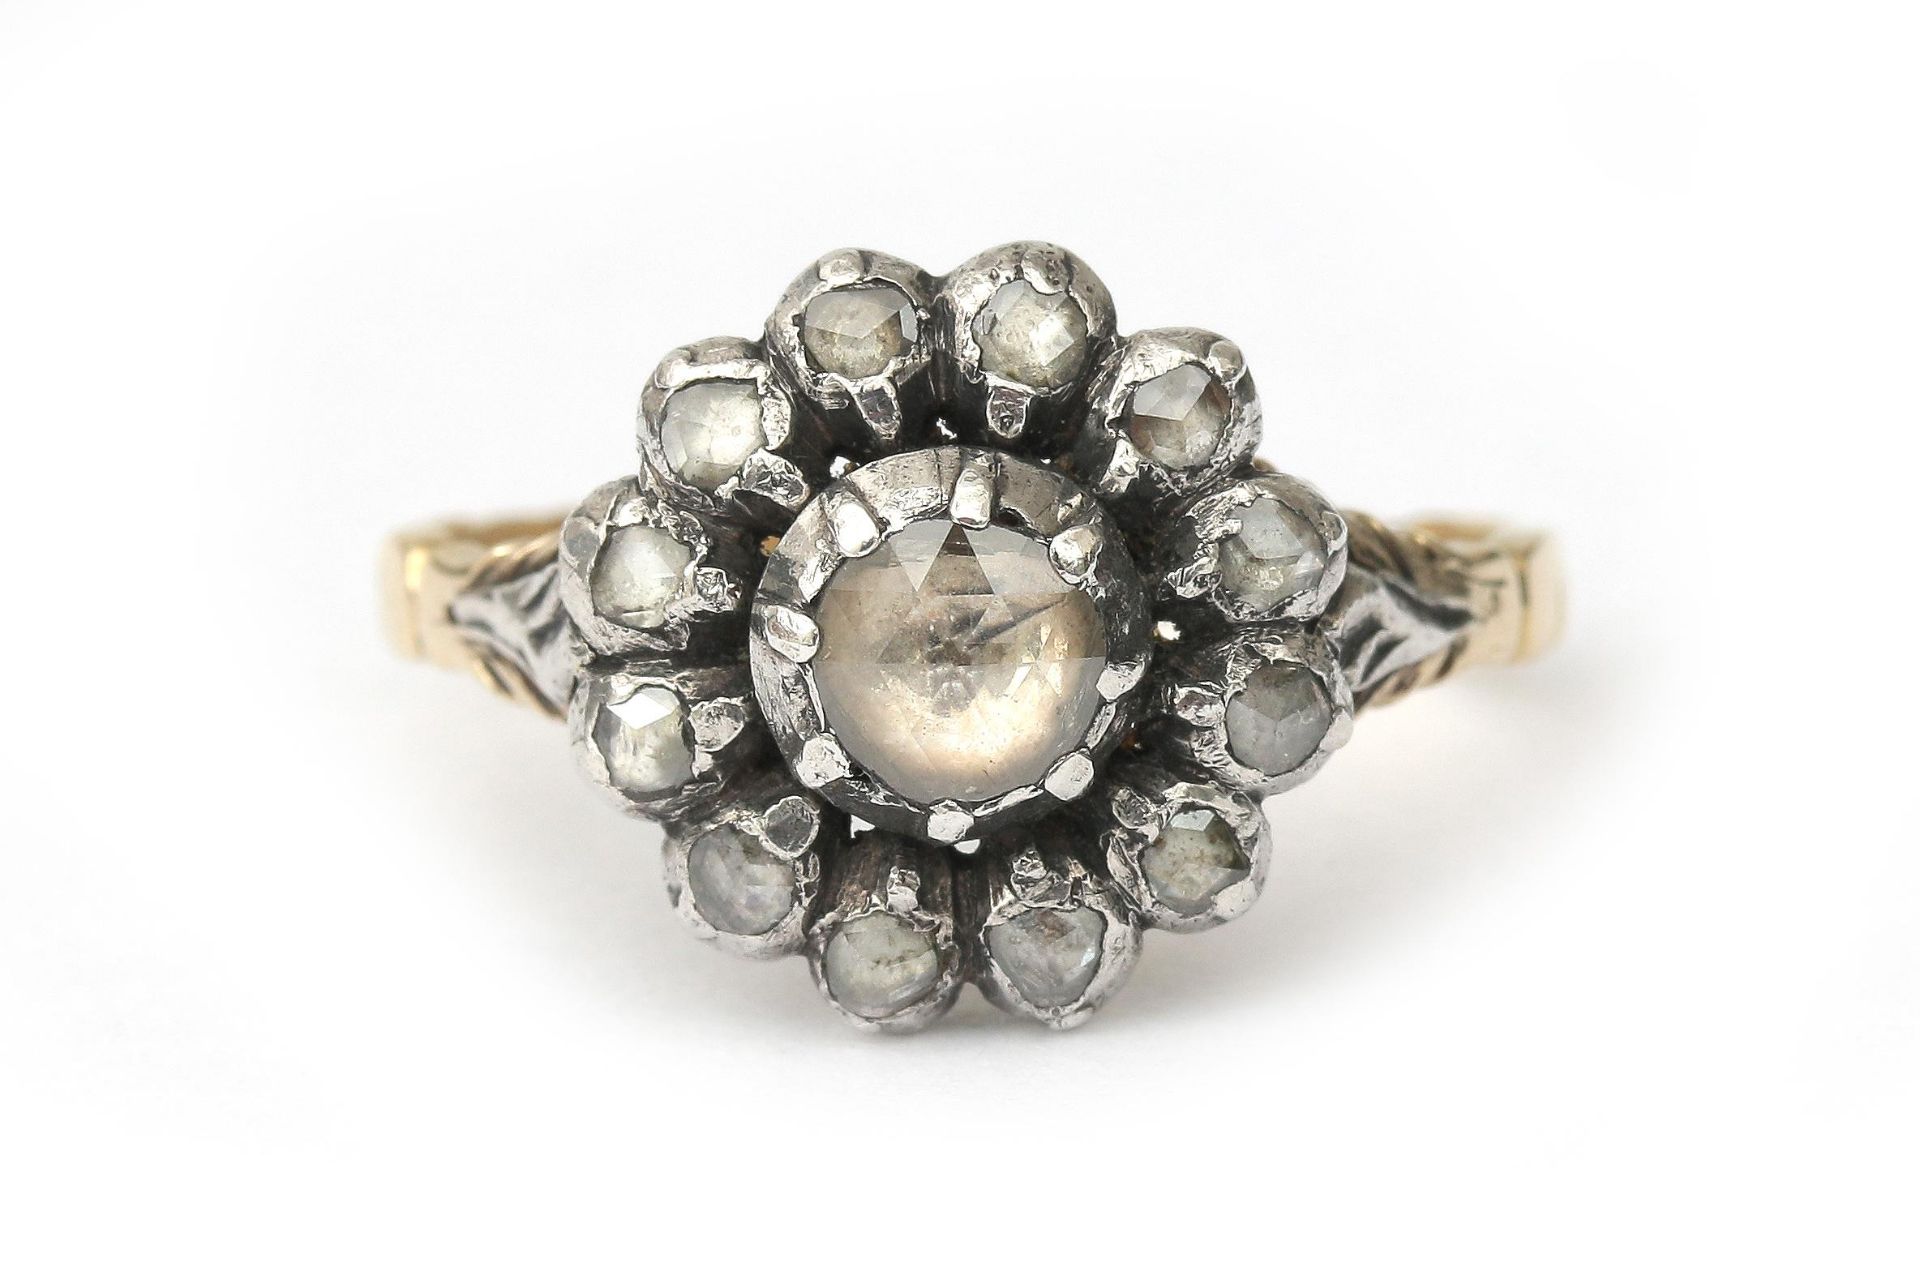 A 14 karat gold with silver rose cut diamond cluster ring